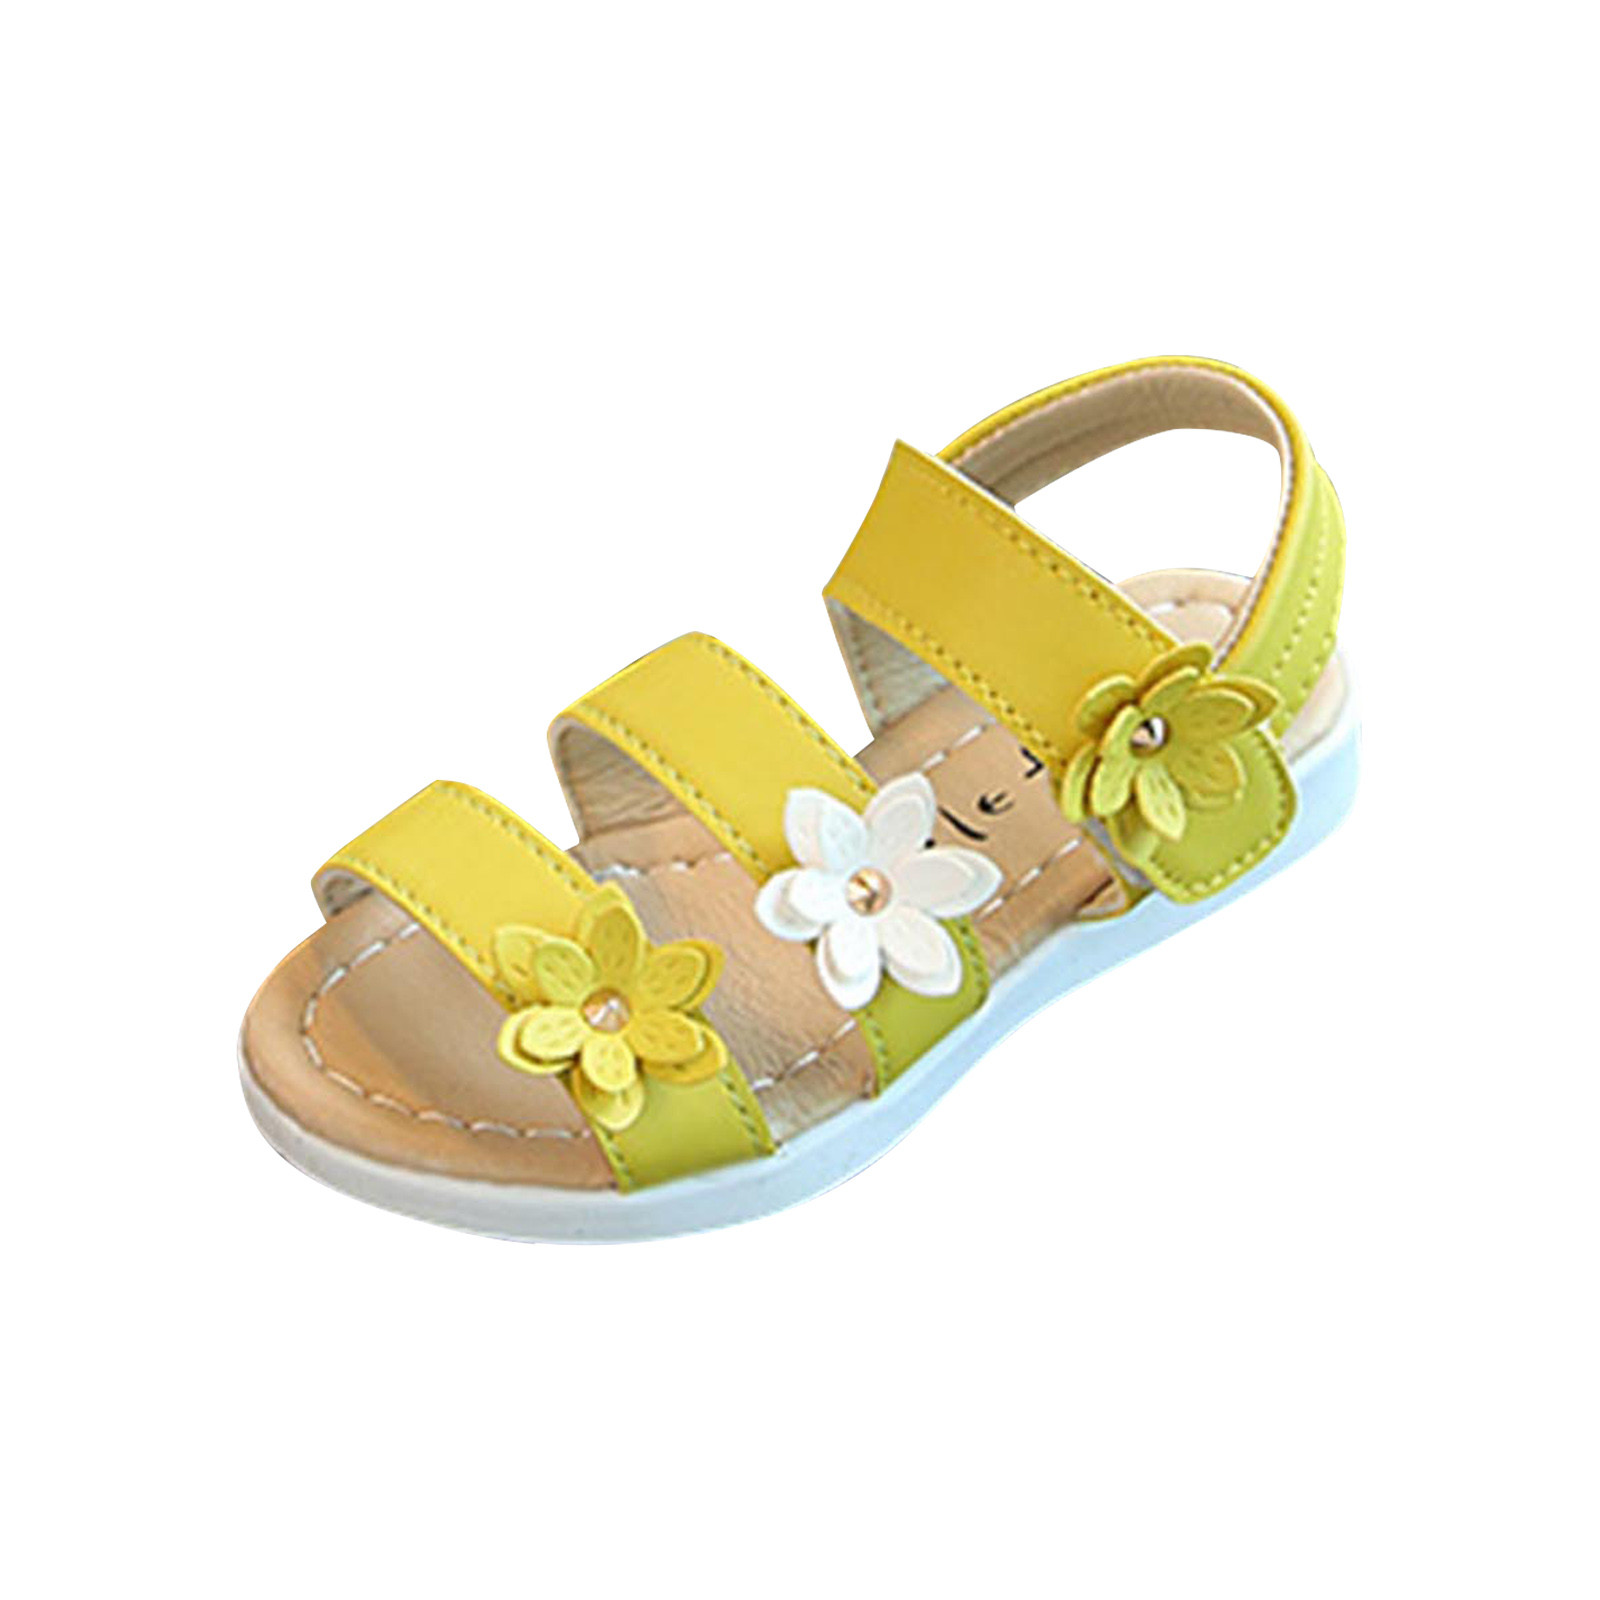 LoyisViDion Toddler Shoes Clearance Children Girls Shoes Sandals Princess Open-Toed Soft Bottom Flowers Roman Beach Shoes Yellow 9-9.5Years - image 1 of 6